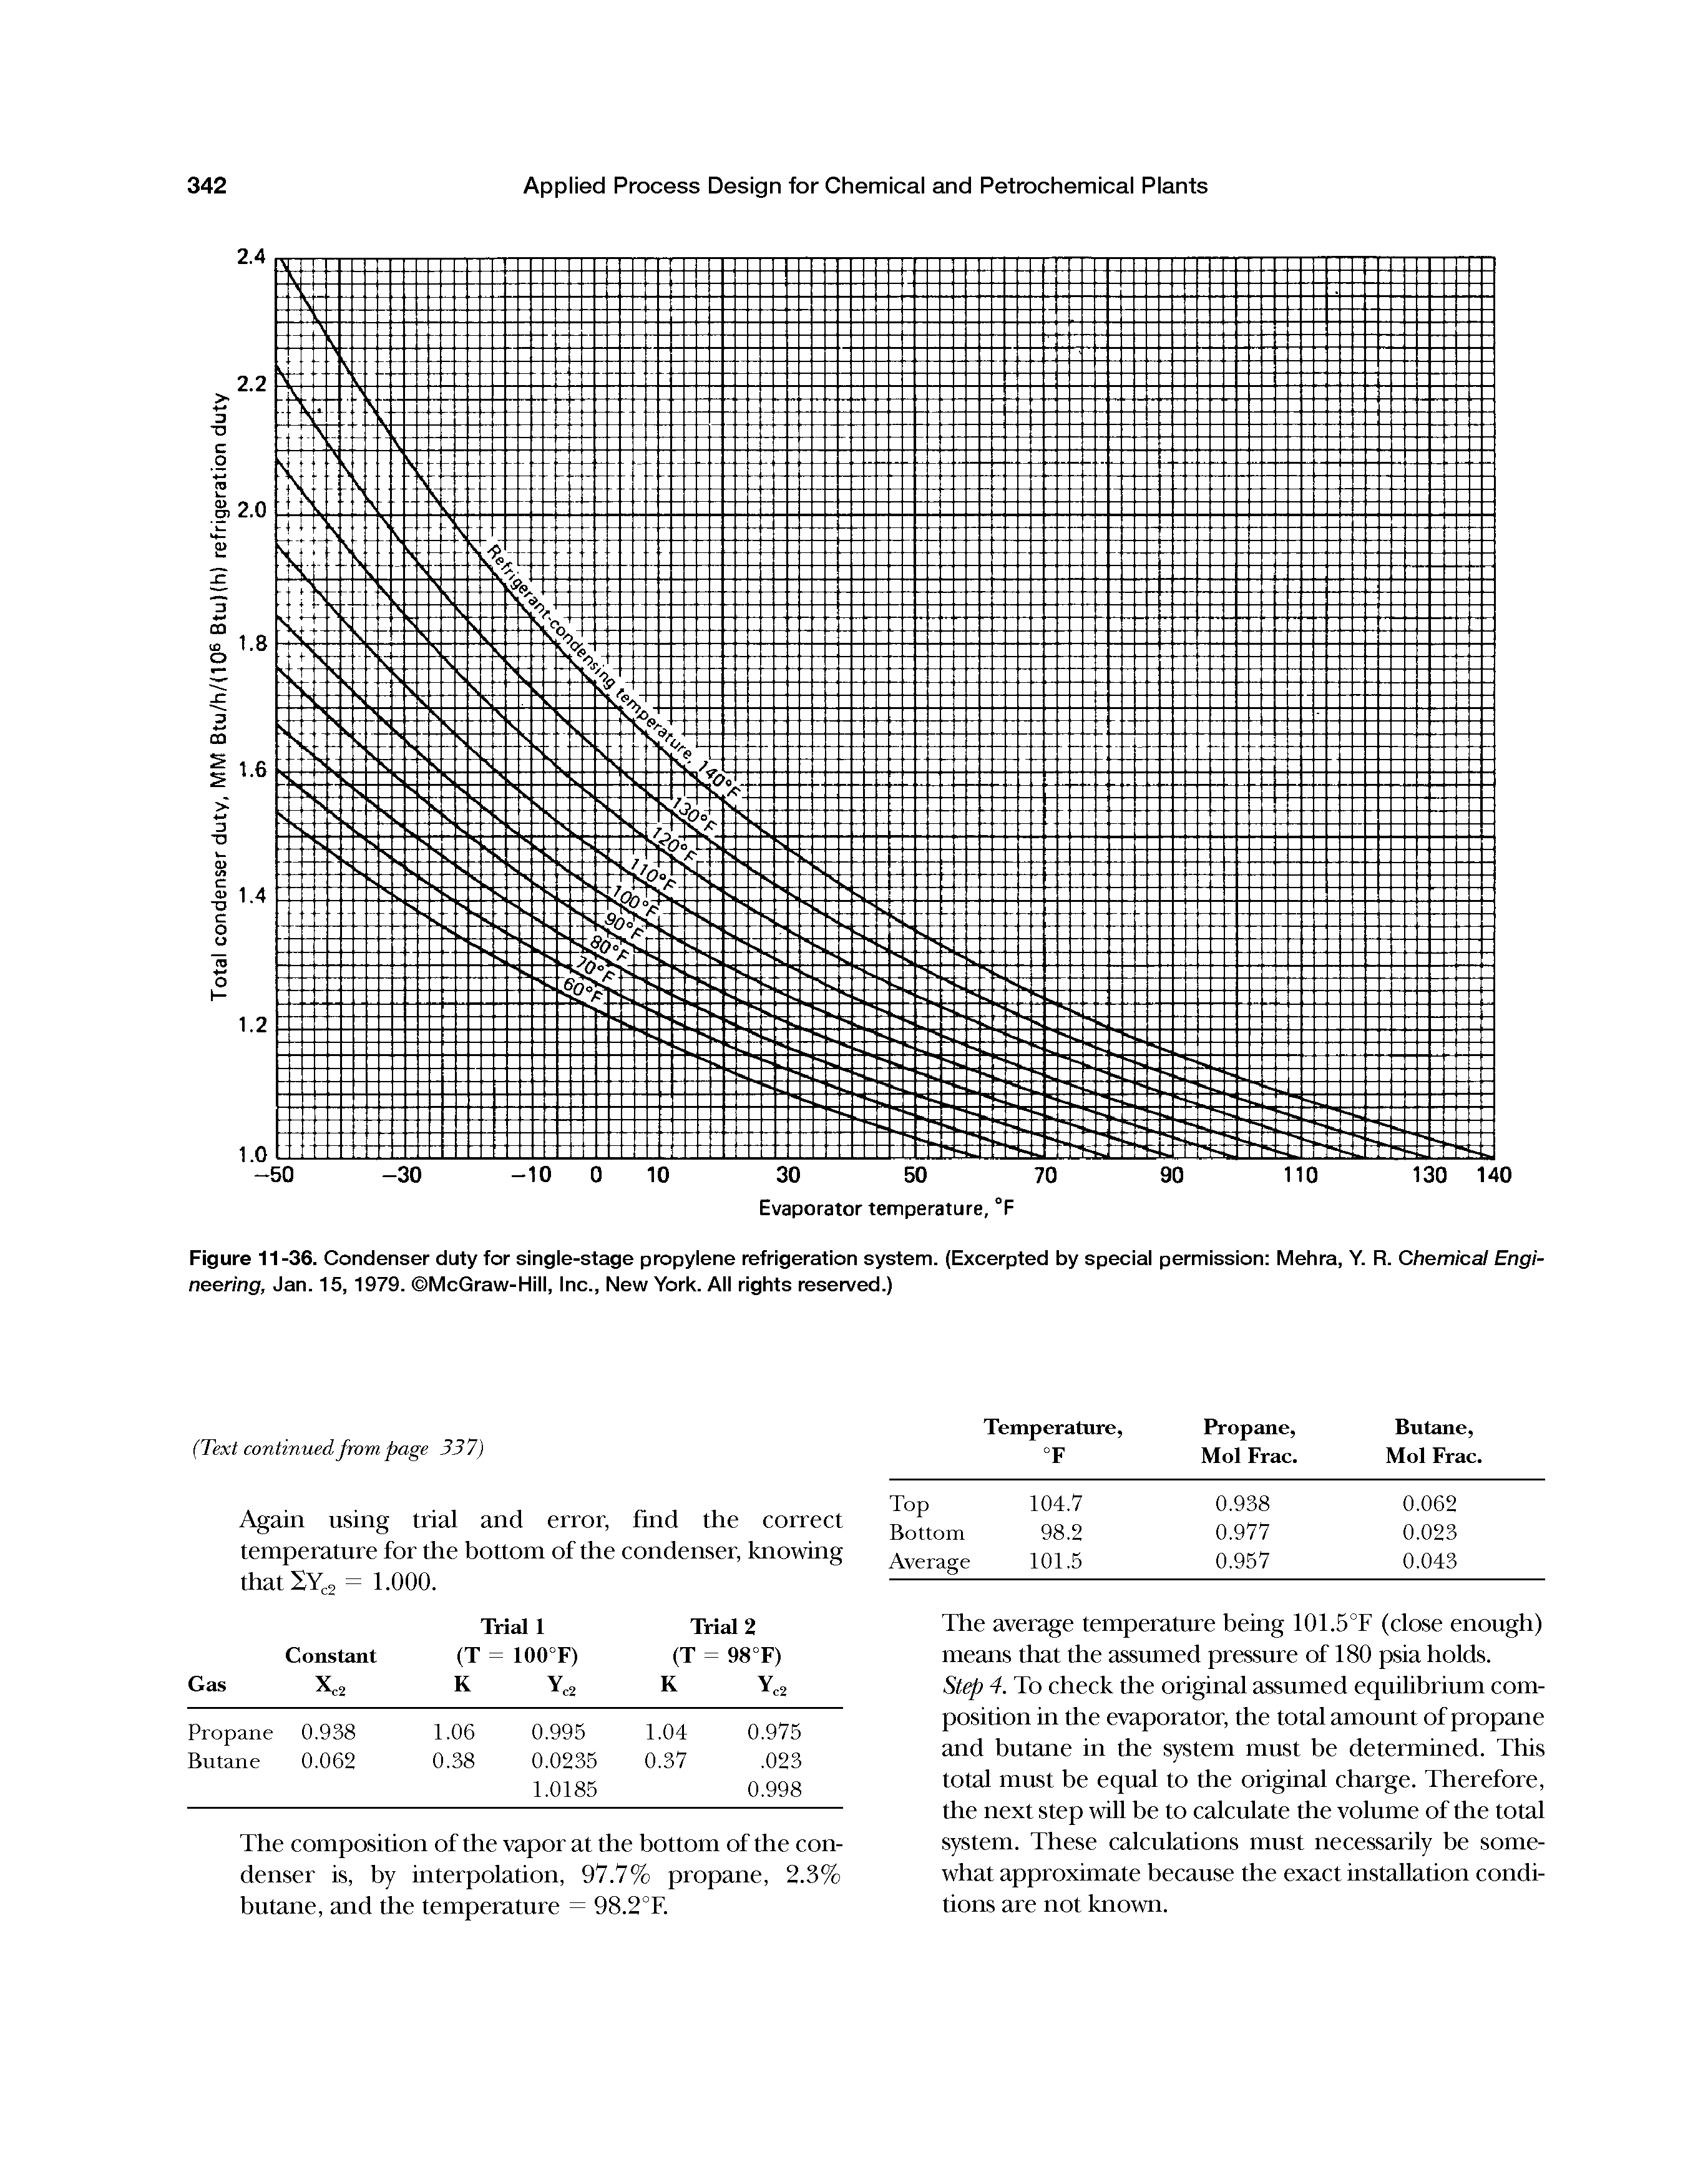 Figure 11-36. Condenser duty for single-stage propylene refrigeration system. (Excerpted by special permission Mehra, Y. R. Chemical Engineering, Jan. 15, 1979. McGraw-Hill, Inc., New York. All rights reserved.)...